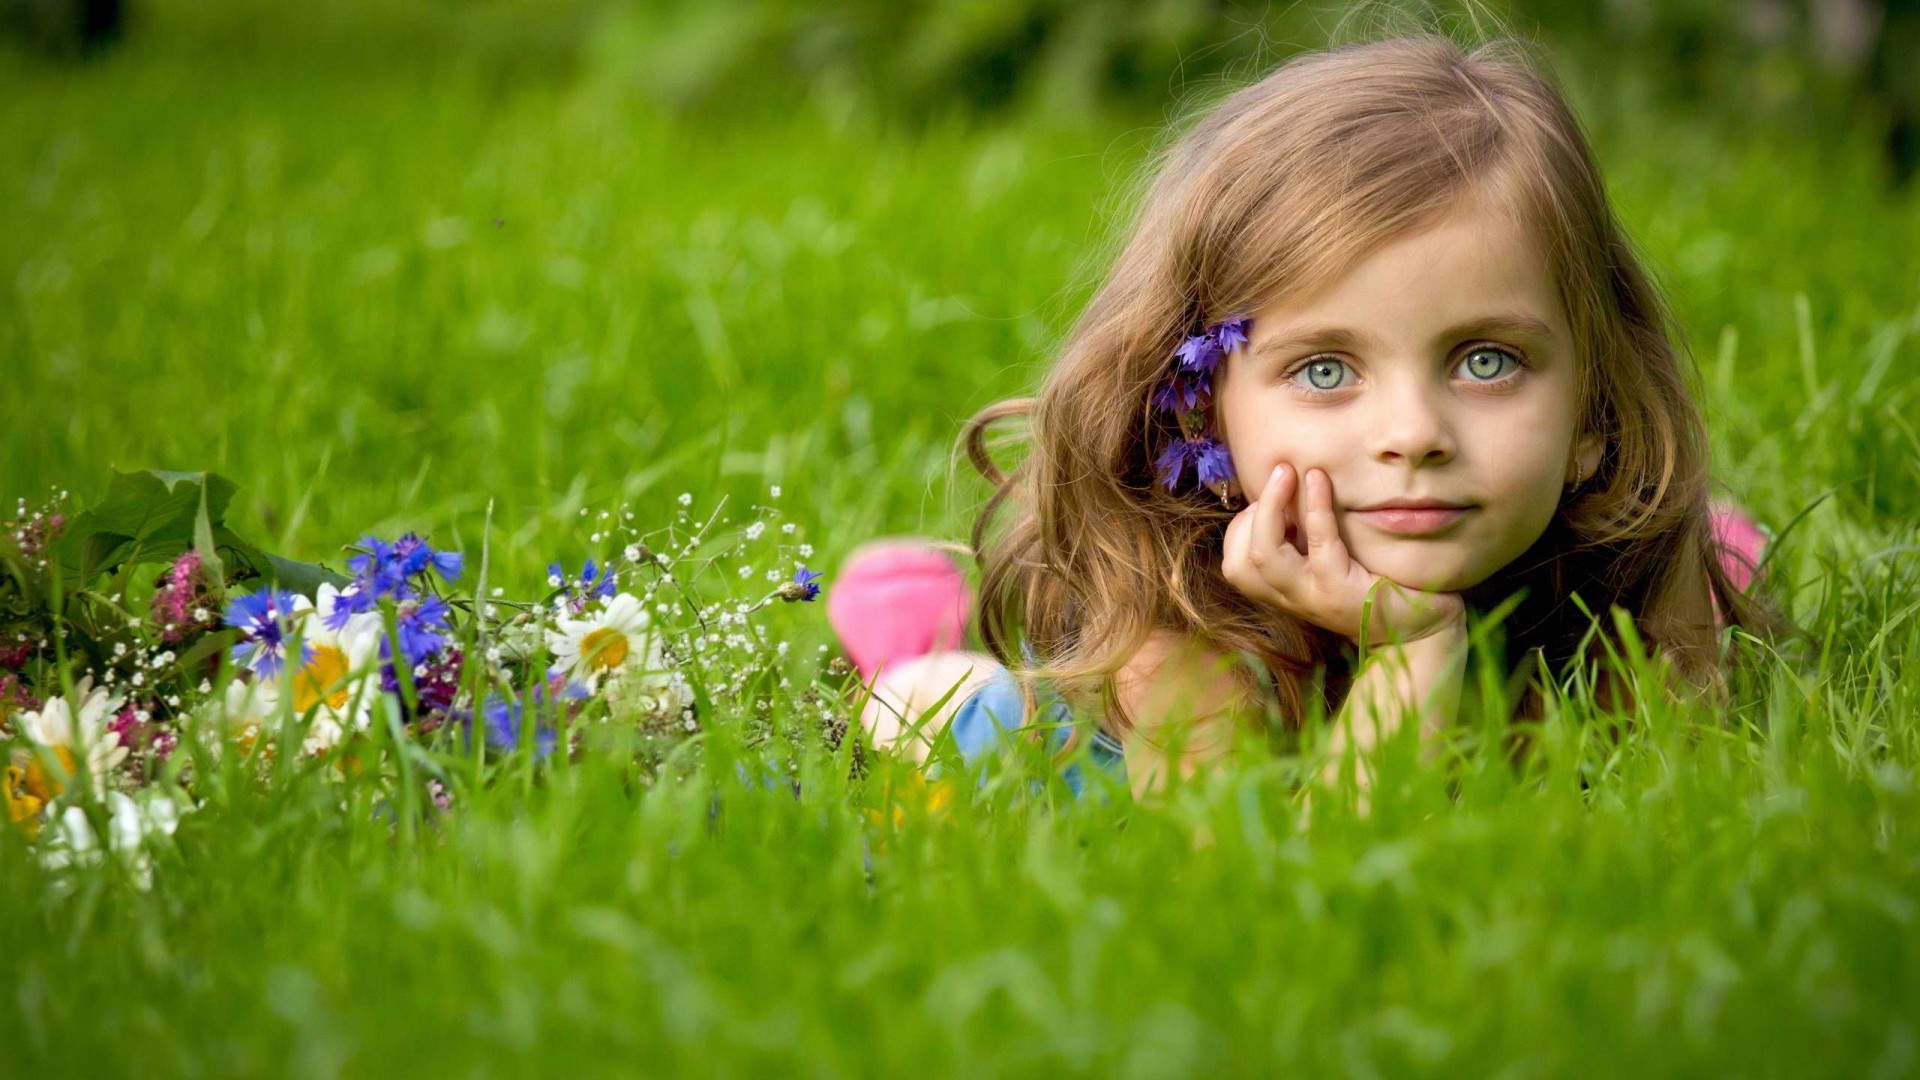 1920x1080 Baby Girl Cute Pictures - Wallpapers PC Free Download